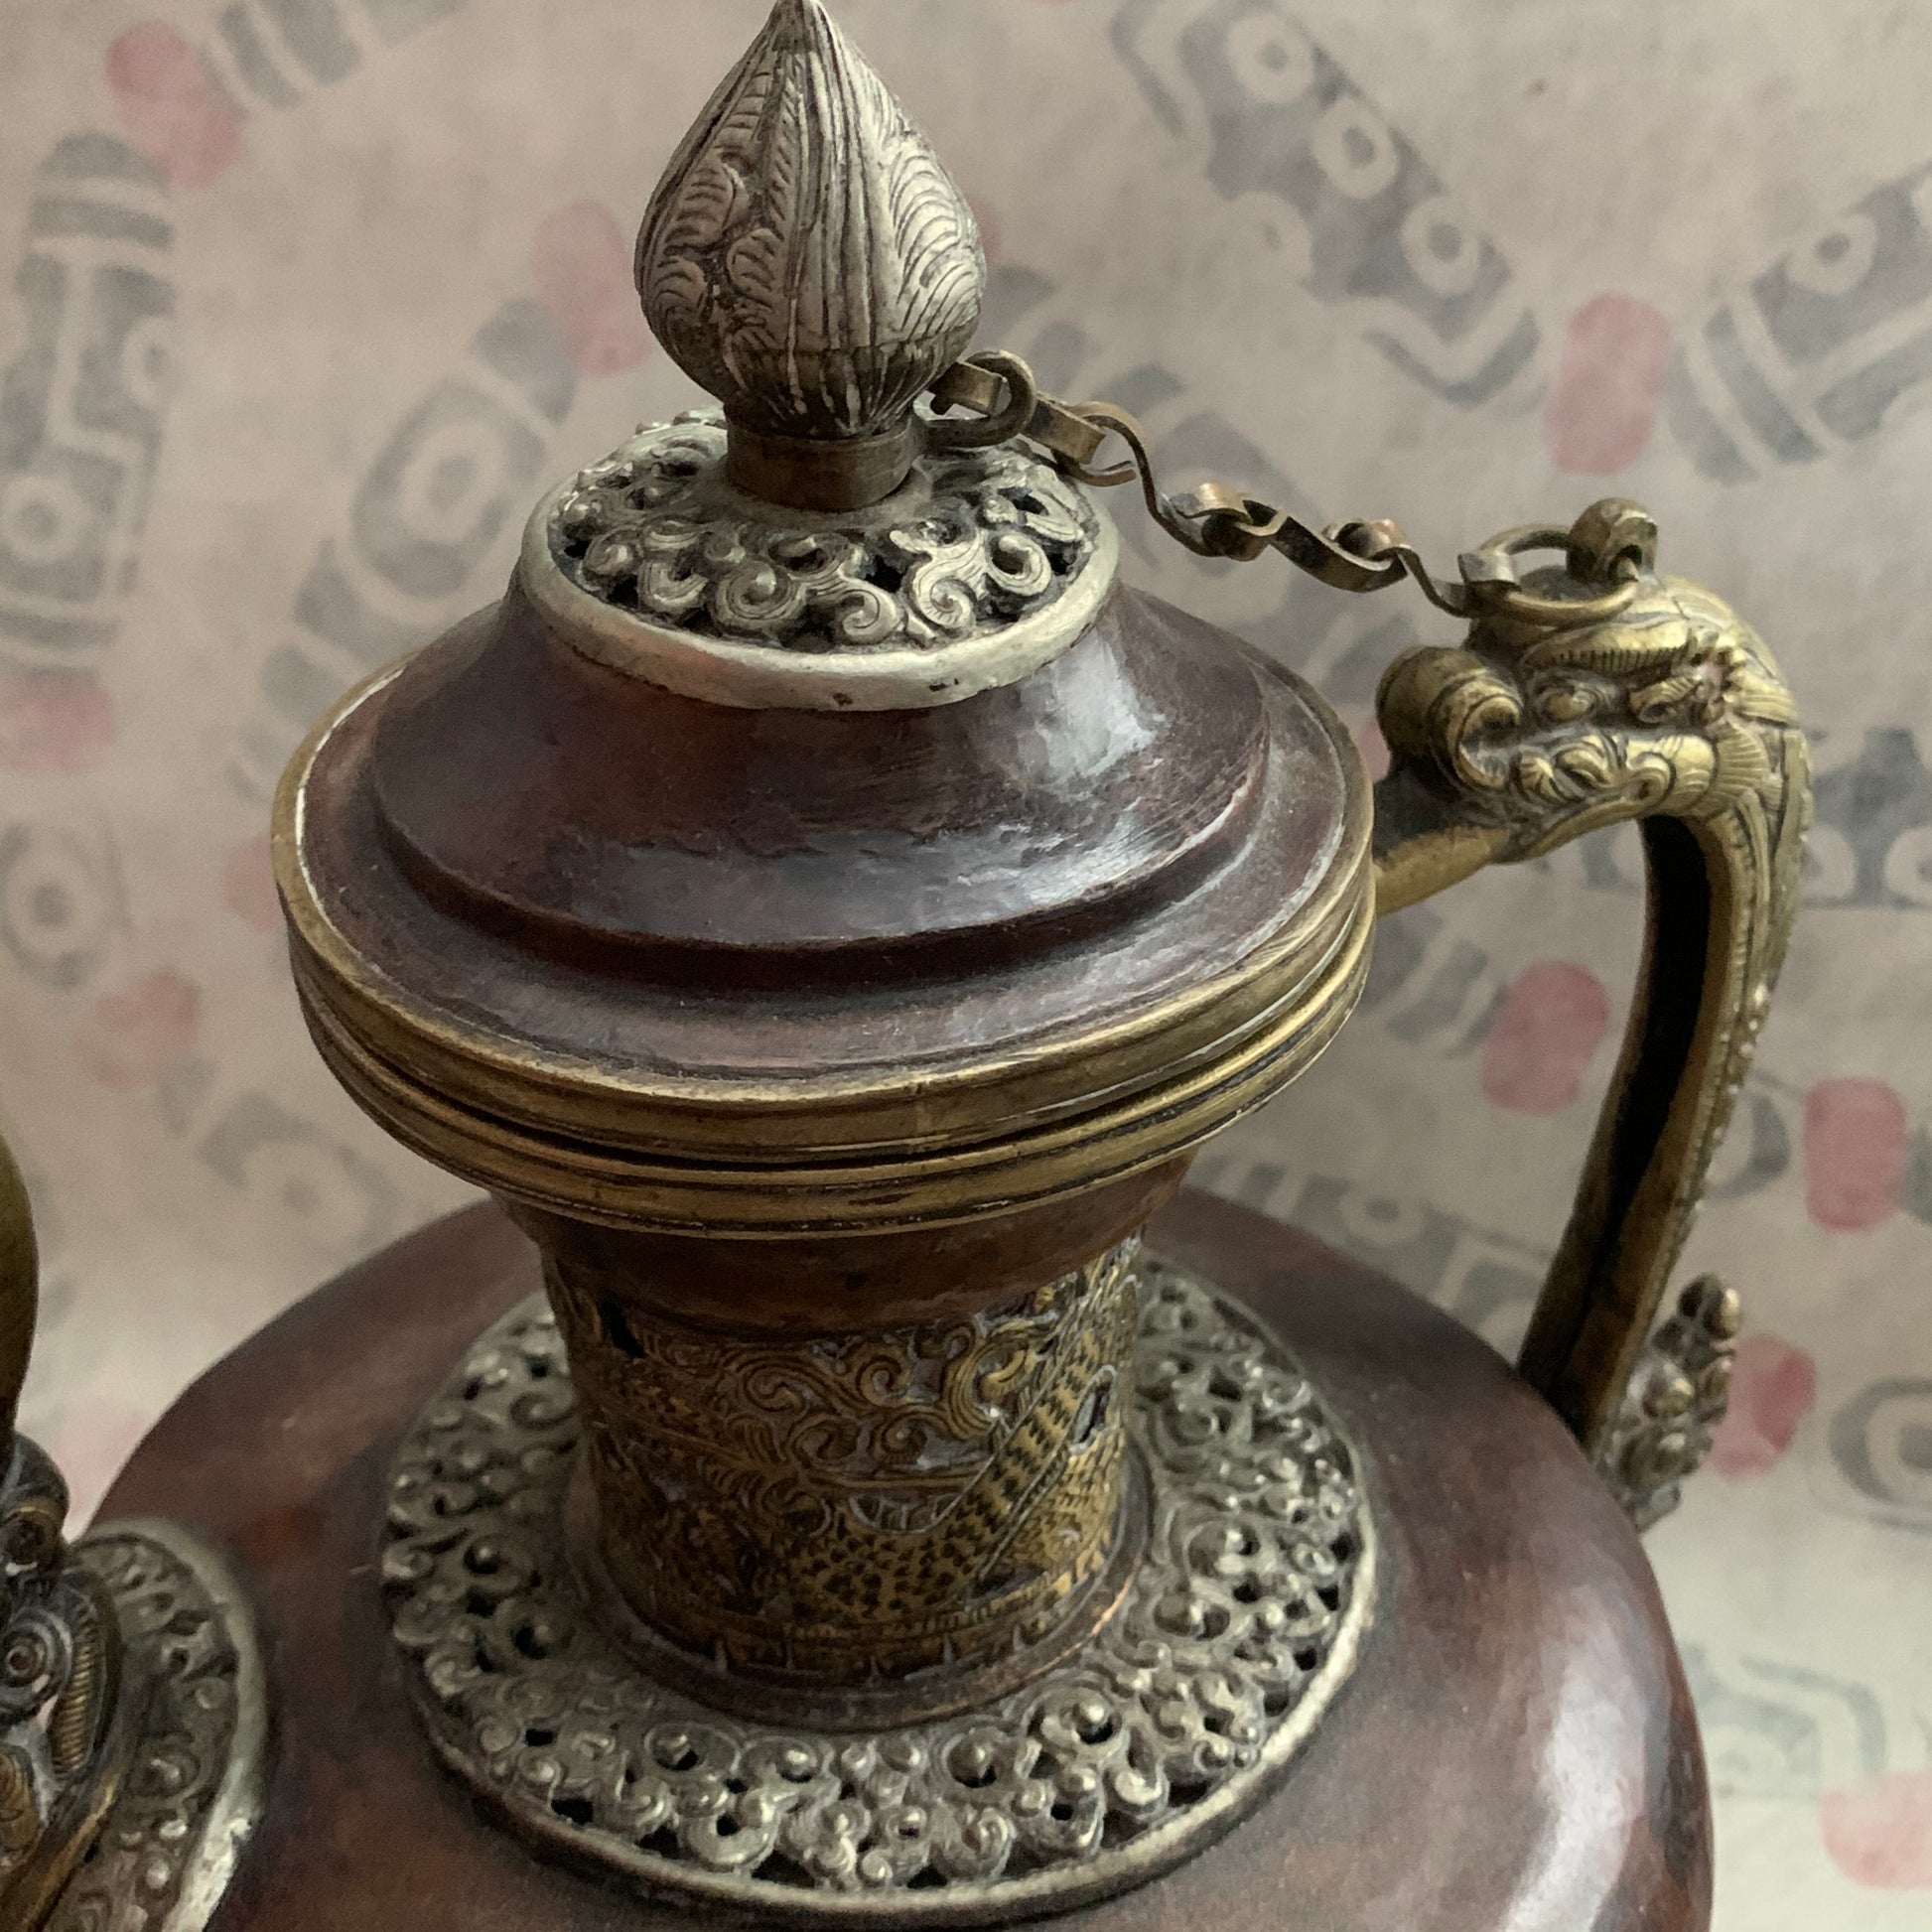 Tibetan Brass Teapot with Antique Finish, 5.5 inches